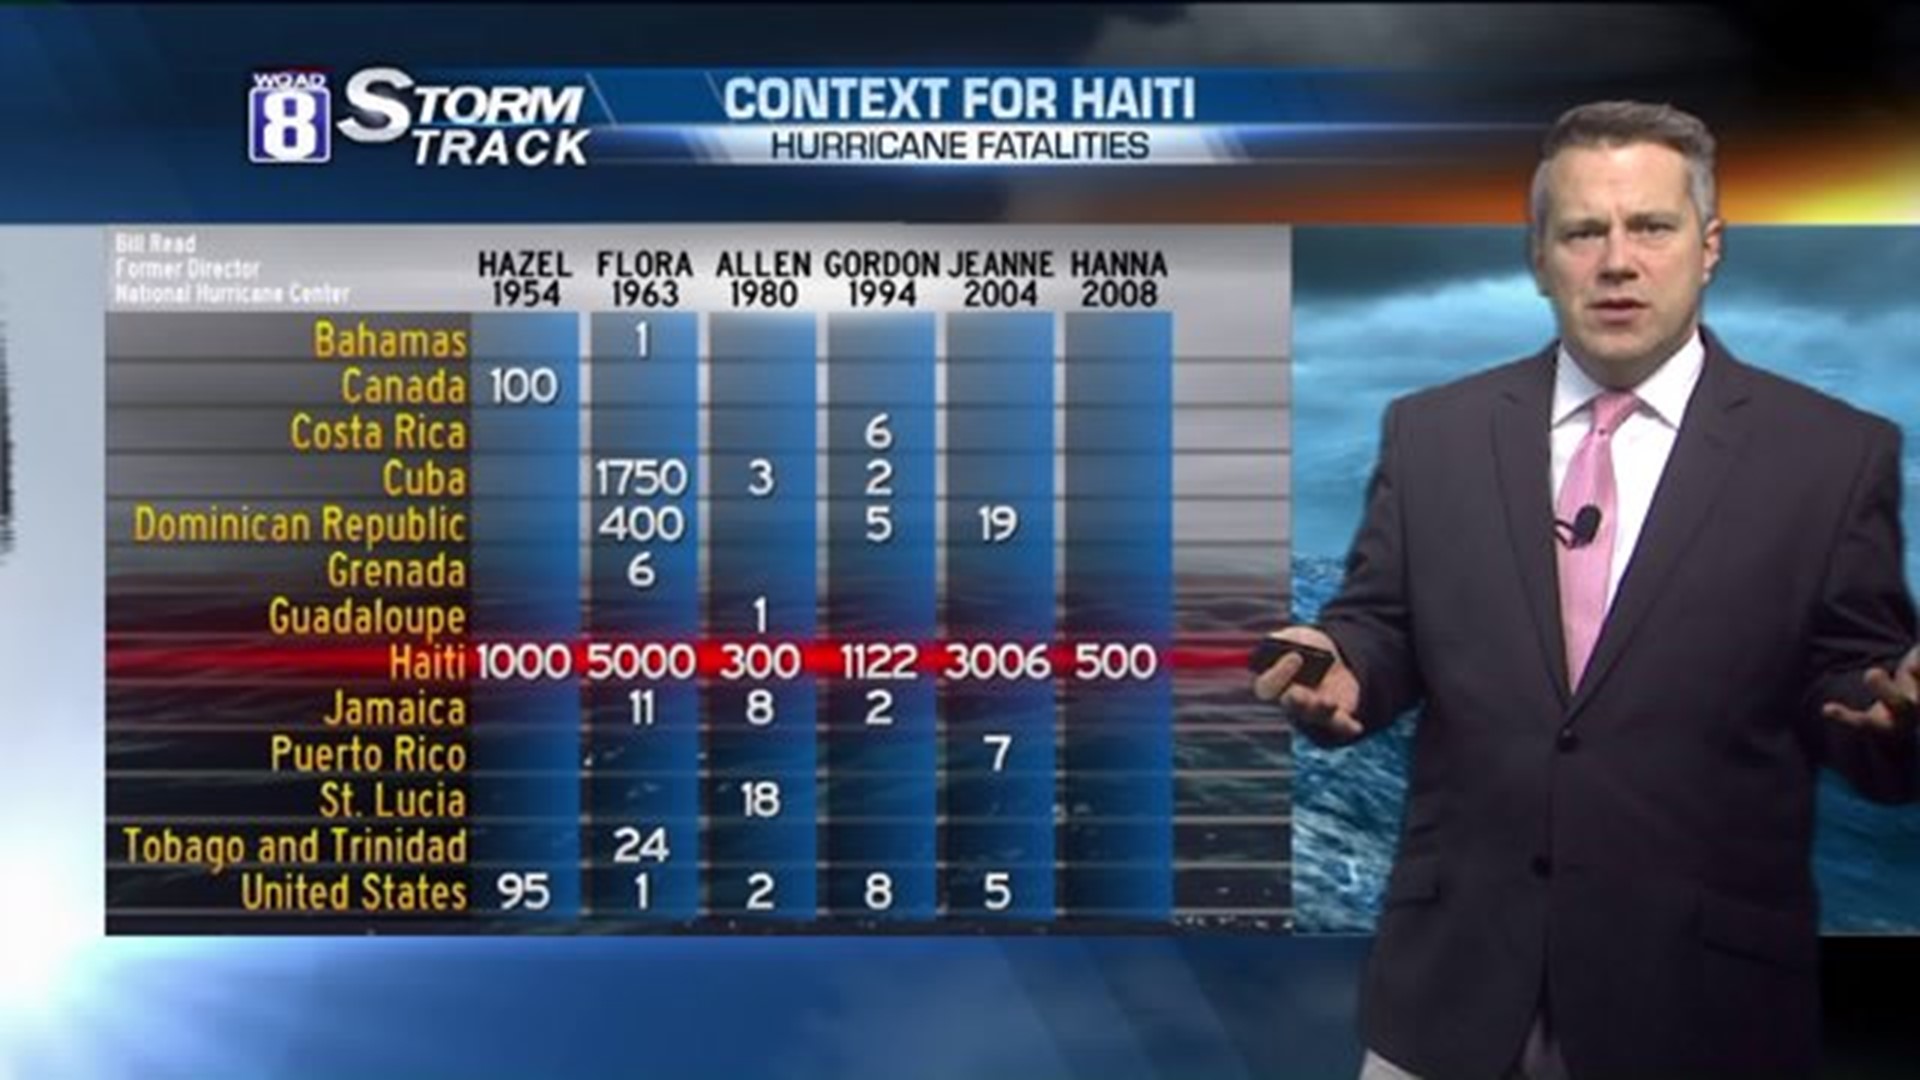 The hurricane is happening in Haiti now; could be one of the worst